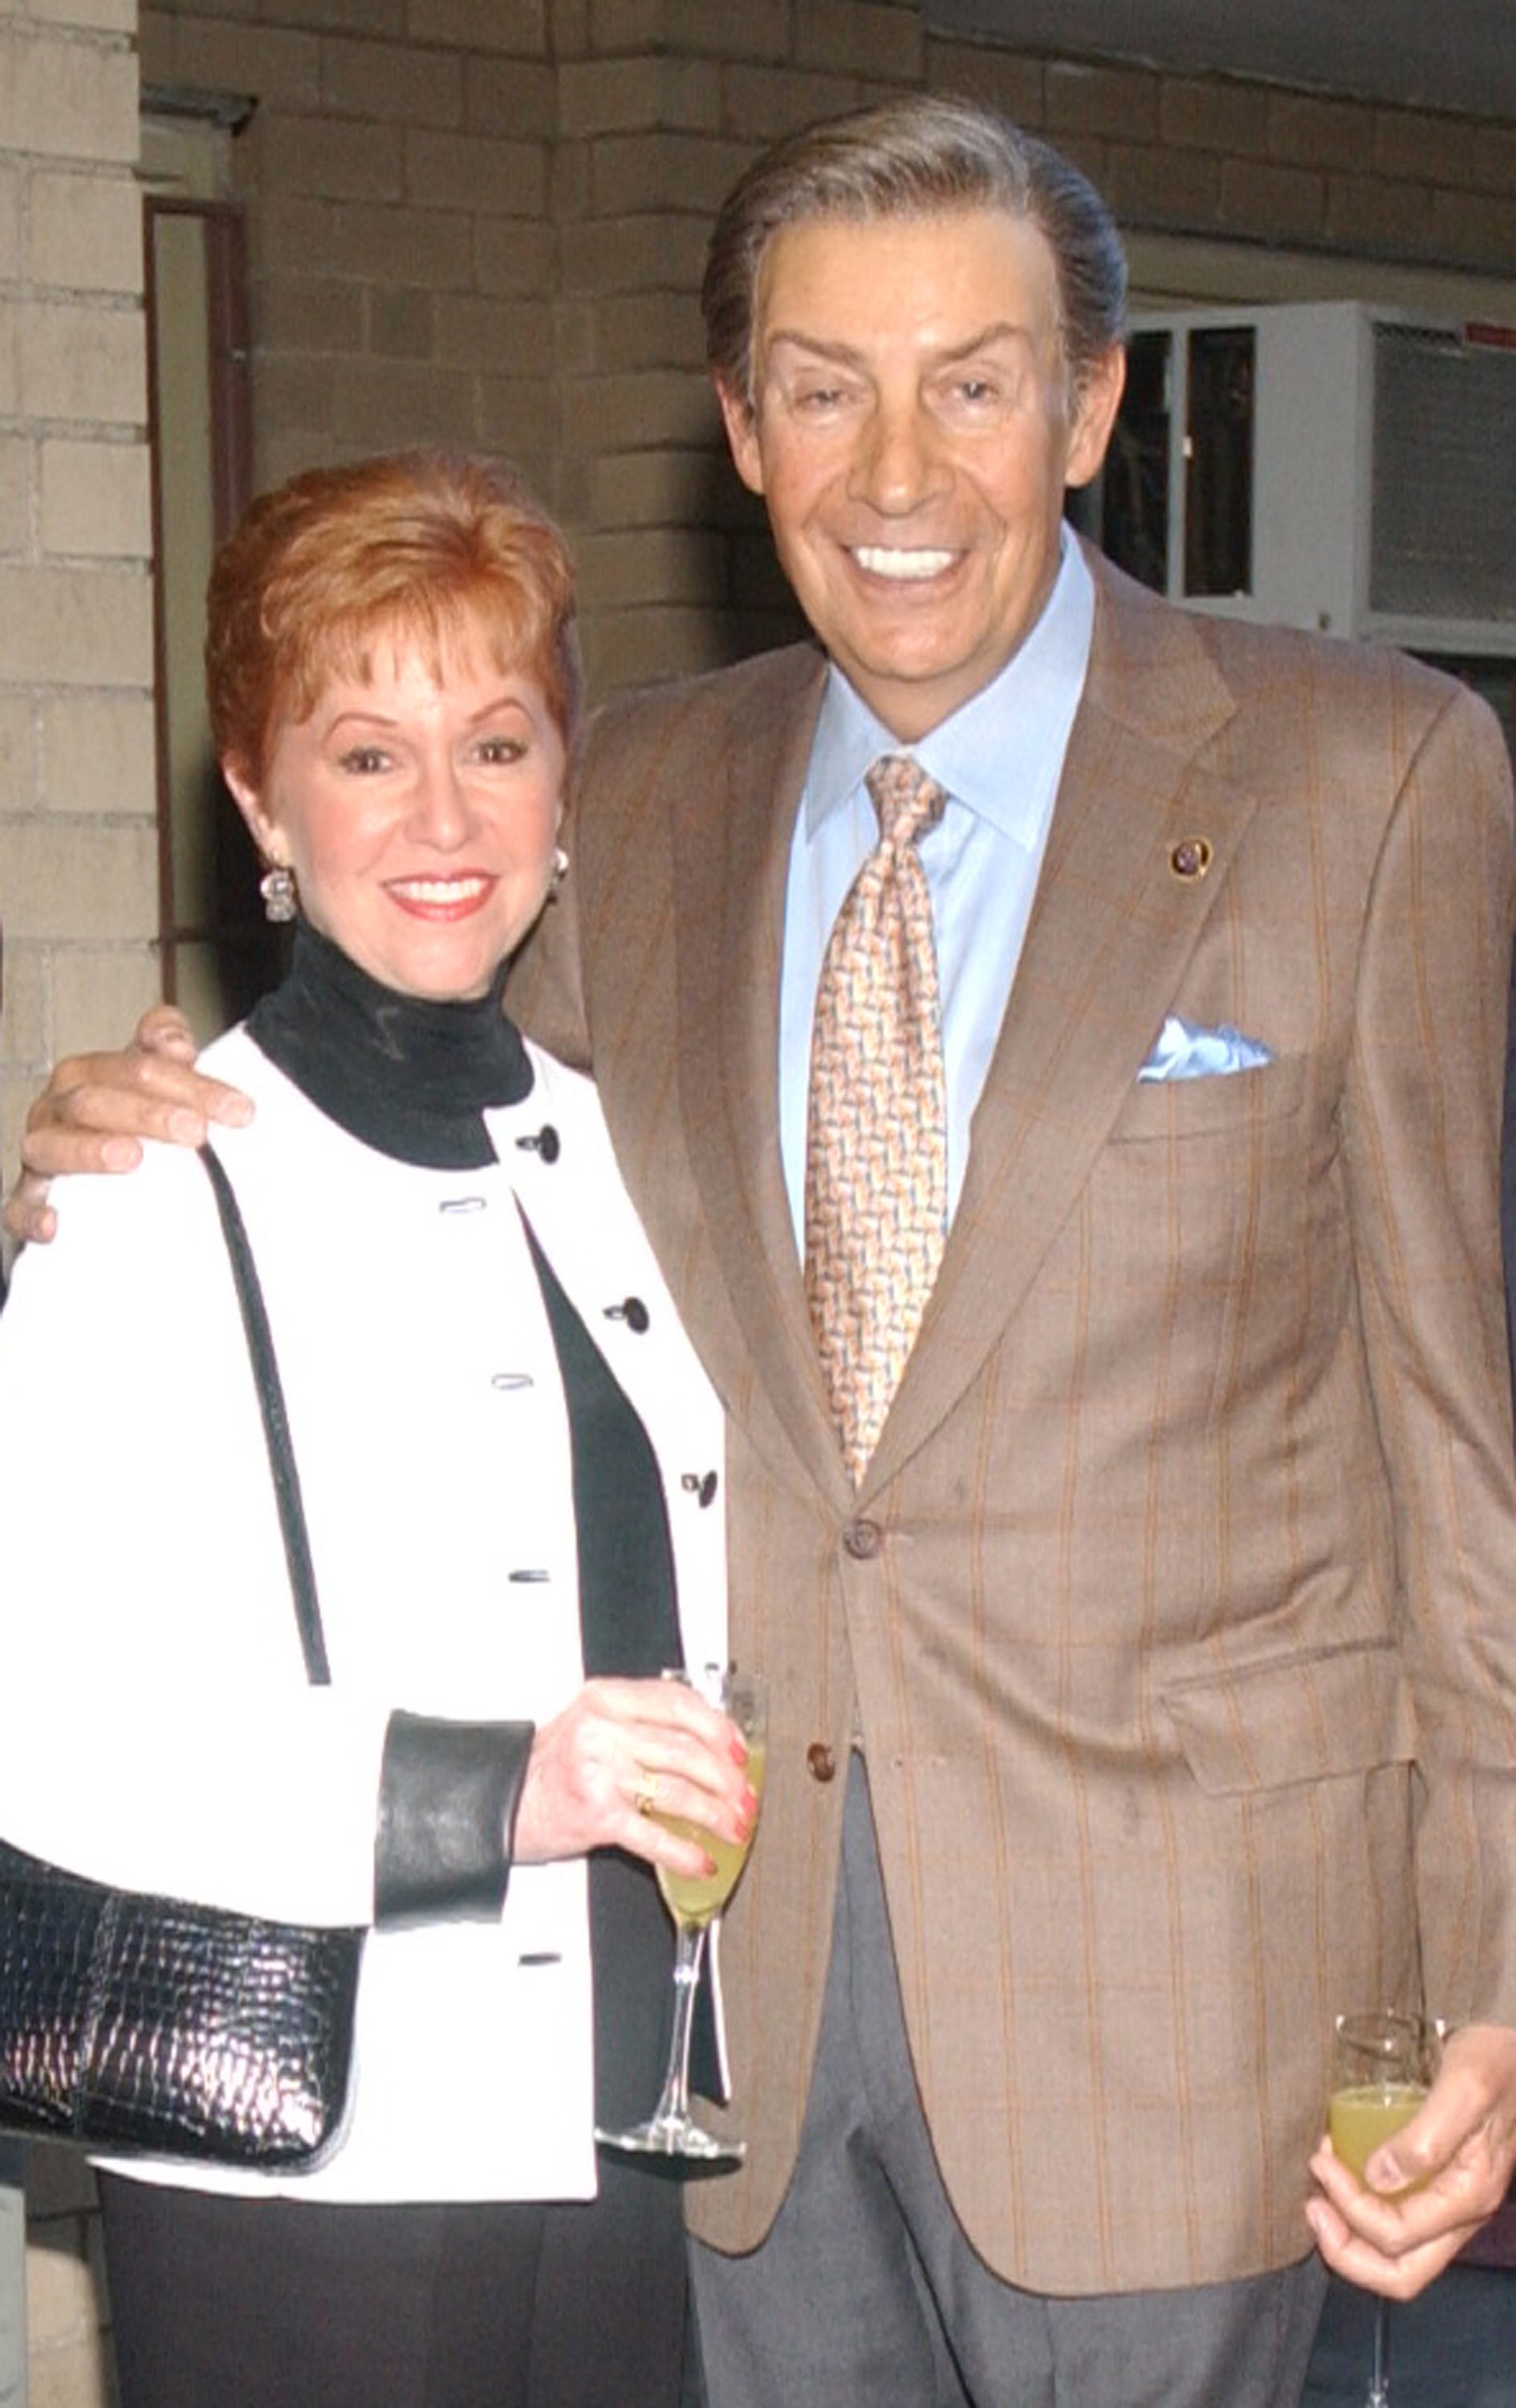 Elaine Cancilla and Jerry Orbach during 1130 at New York City on October 3, 2004 | Source: Getty Images